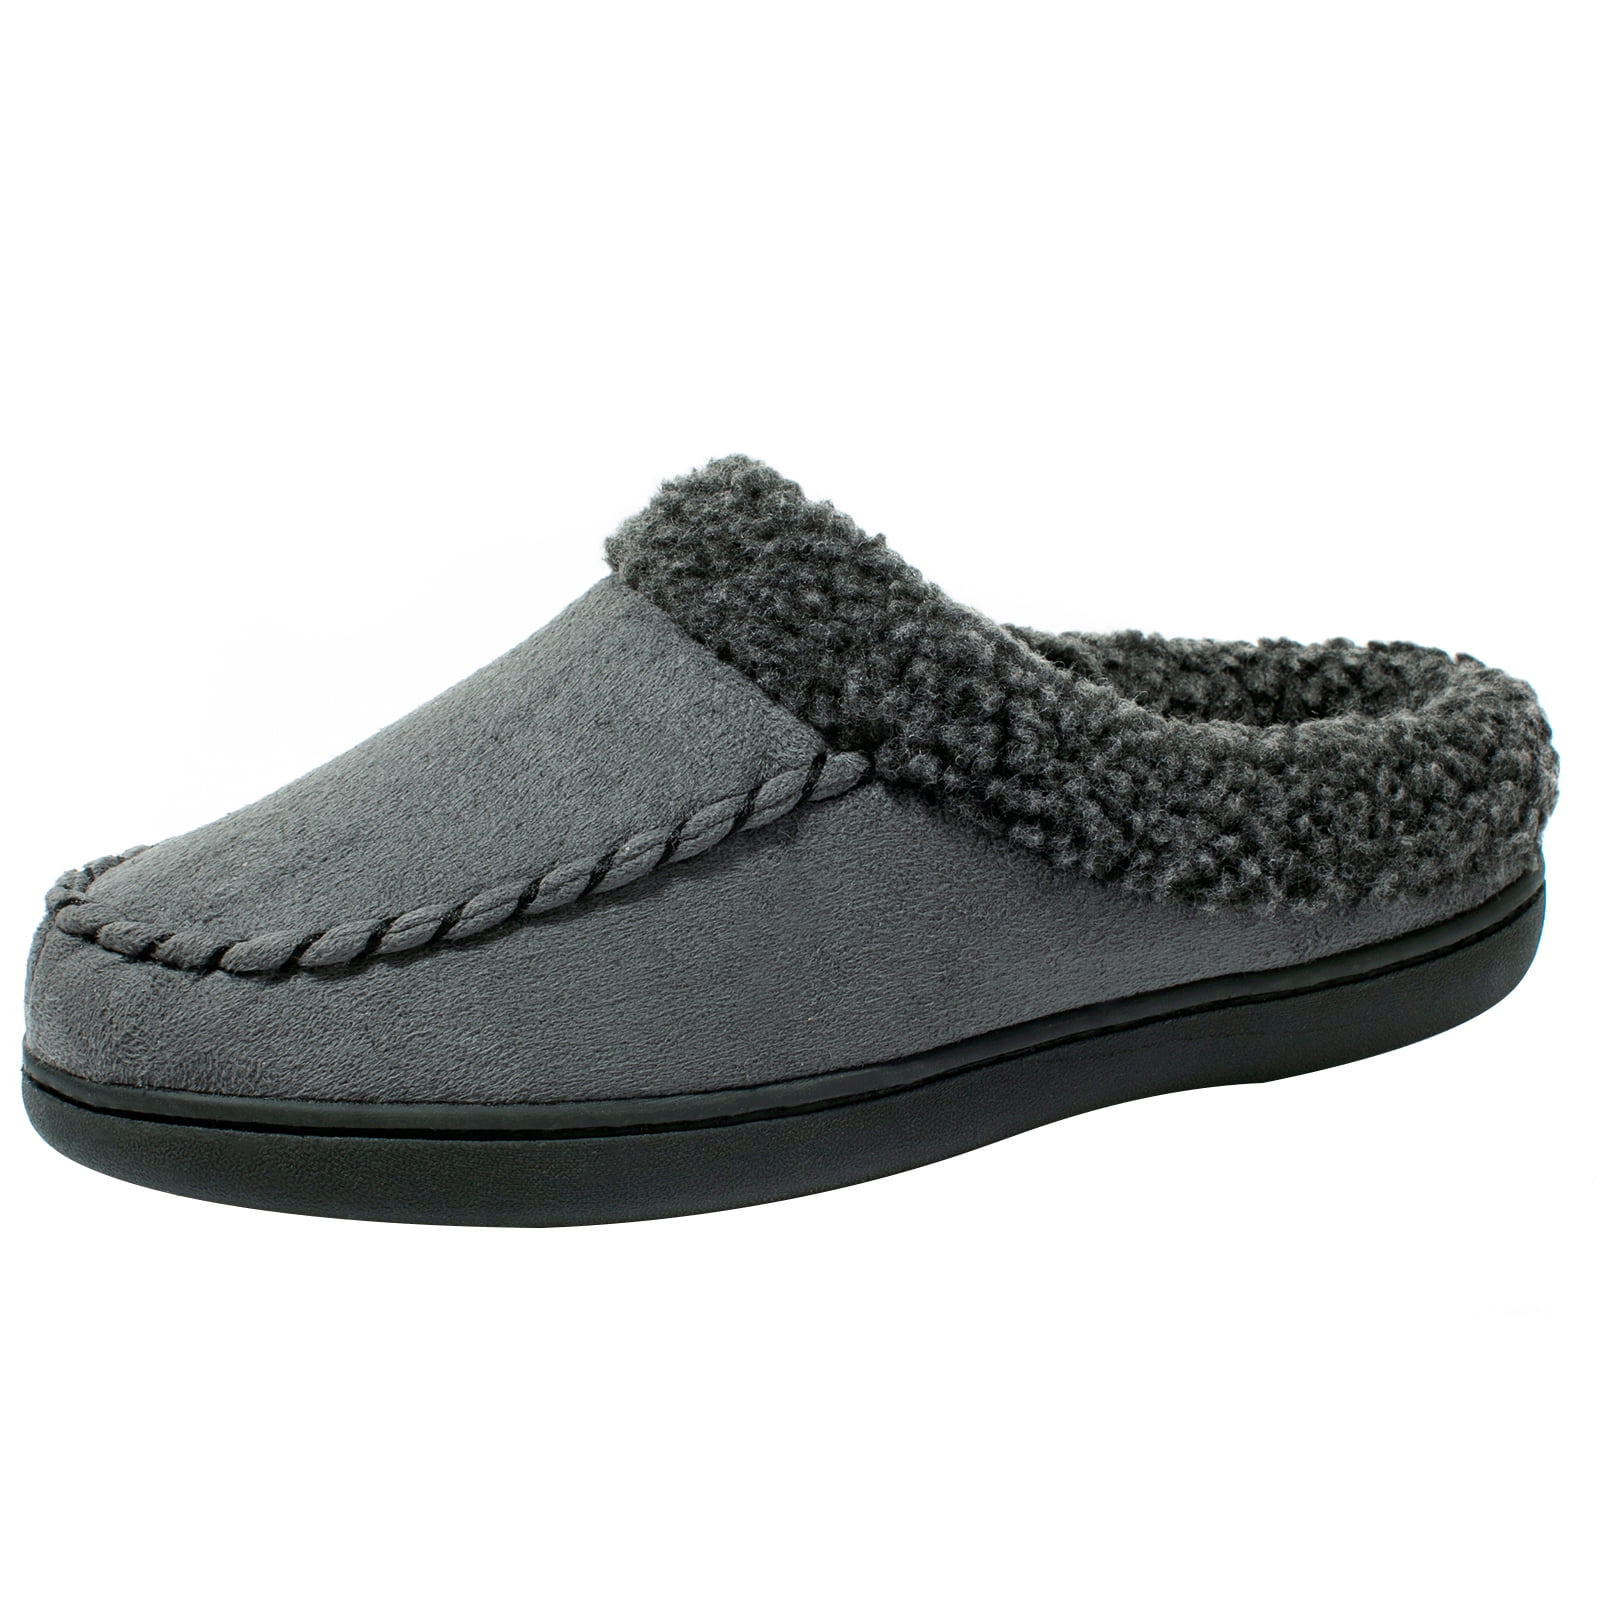 Needbo Men's Moccasin Slippers Microsuede Whipstitch Sherpa Lining ...